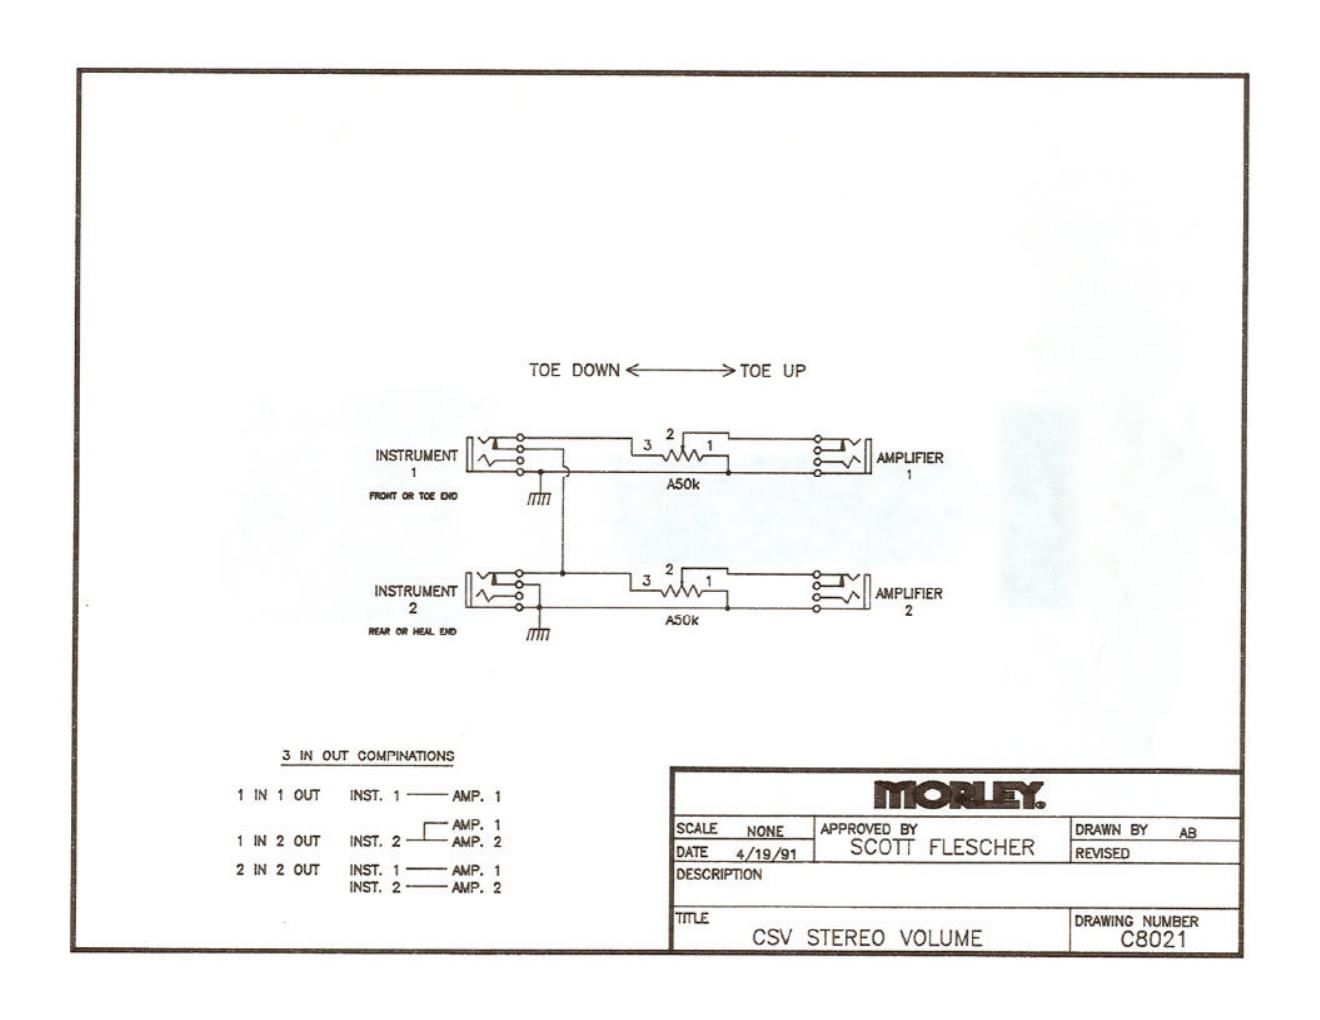 Morley CSV Compact Stereo Volume Schematic